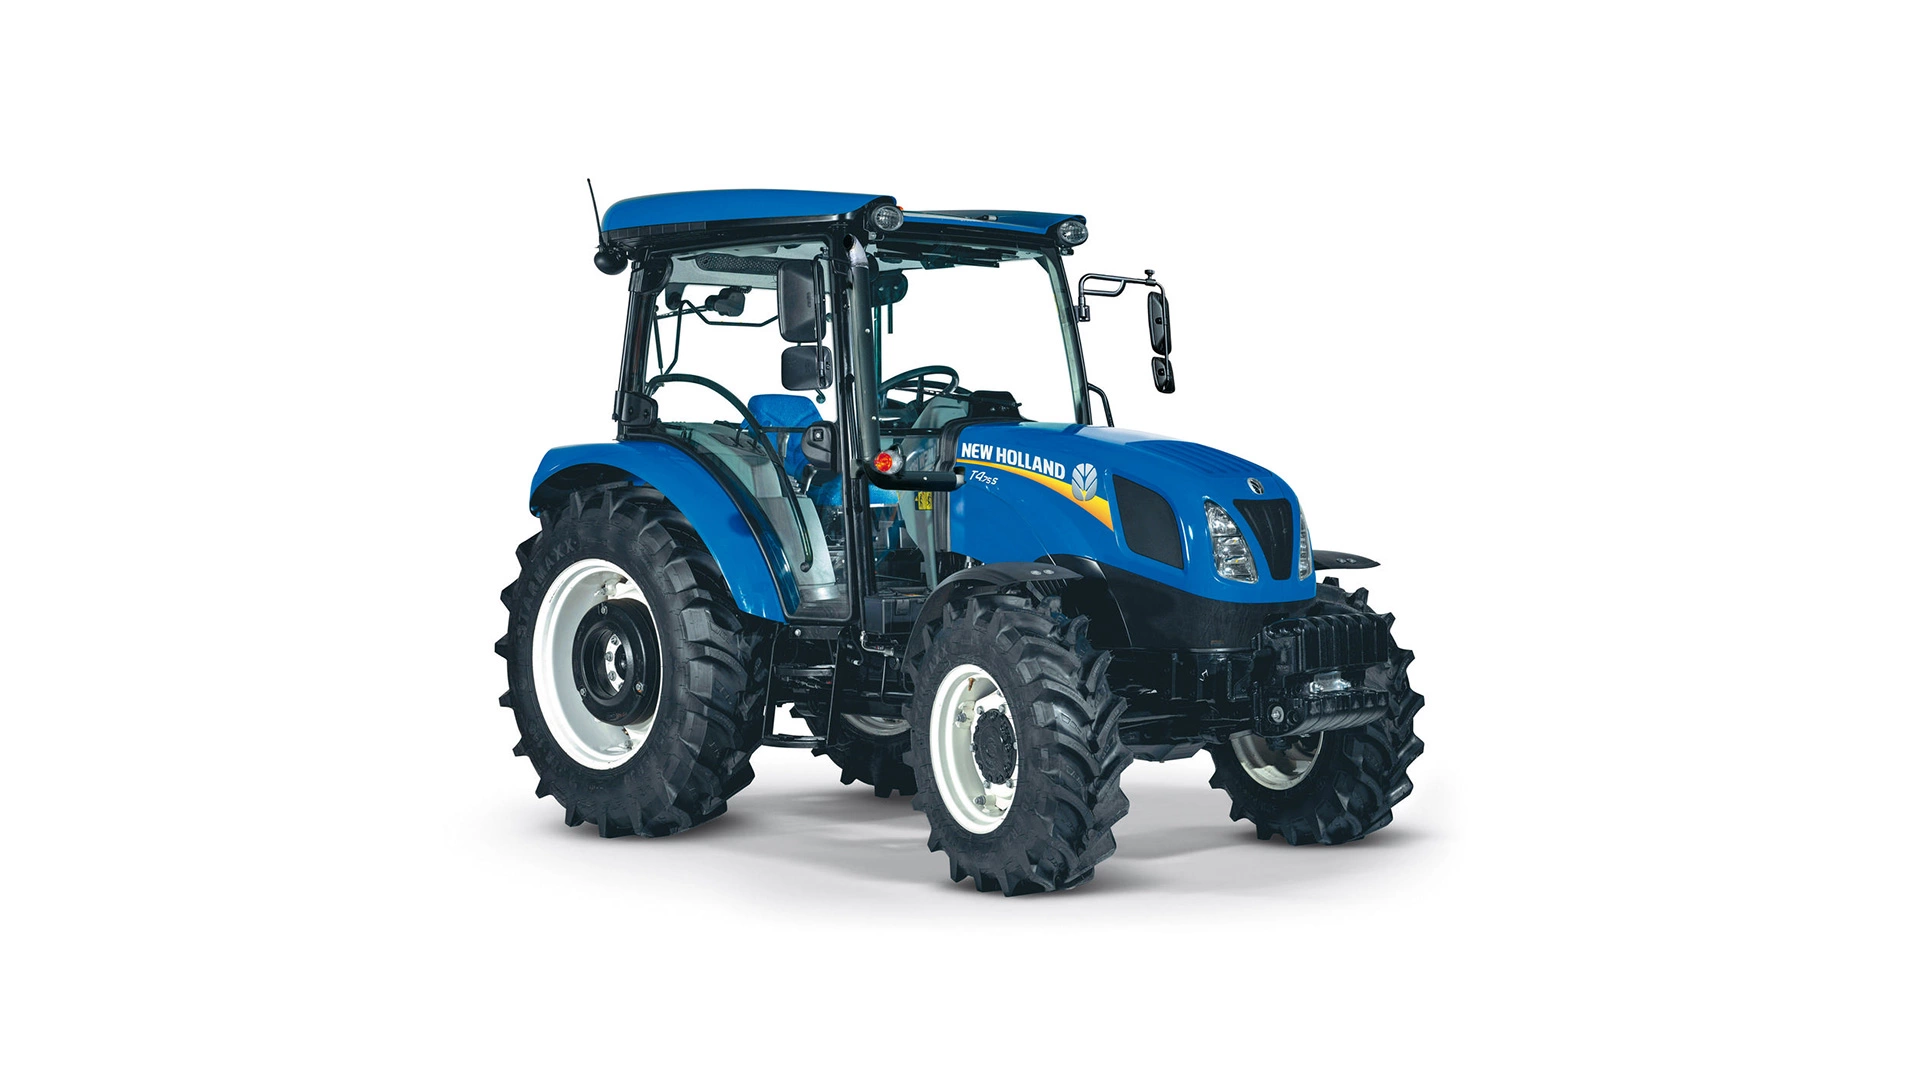 New Holland T4S farming tractor